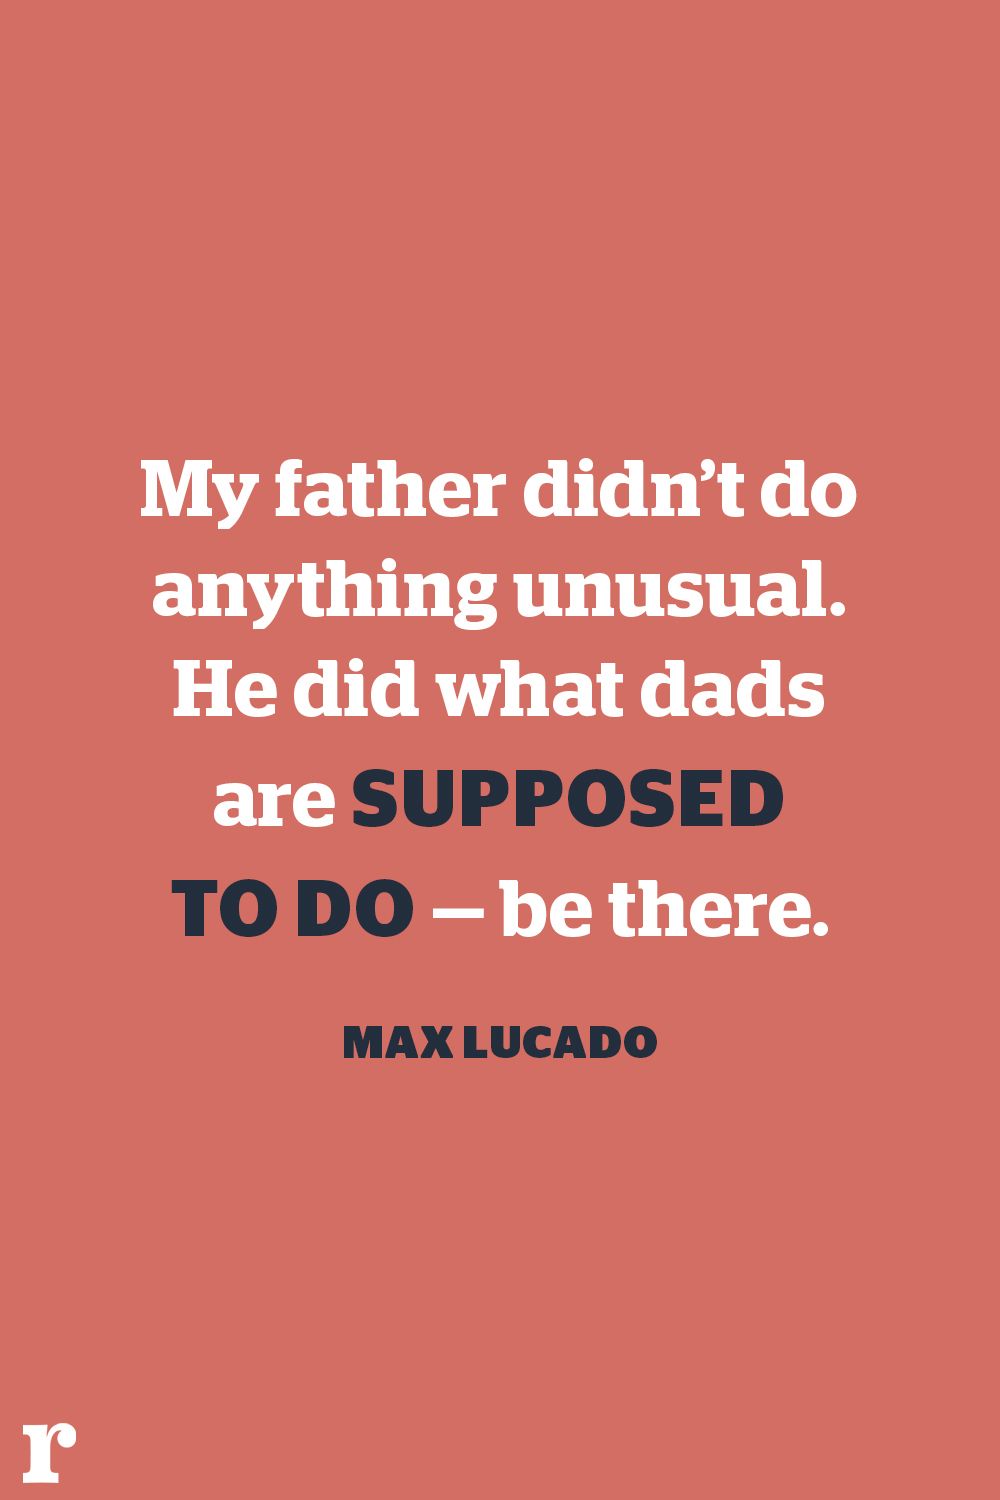 my father didn’t do anythign unusual. he did what dads are supposed to do be there. max lucado